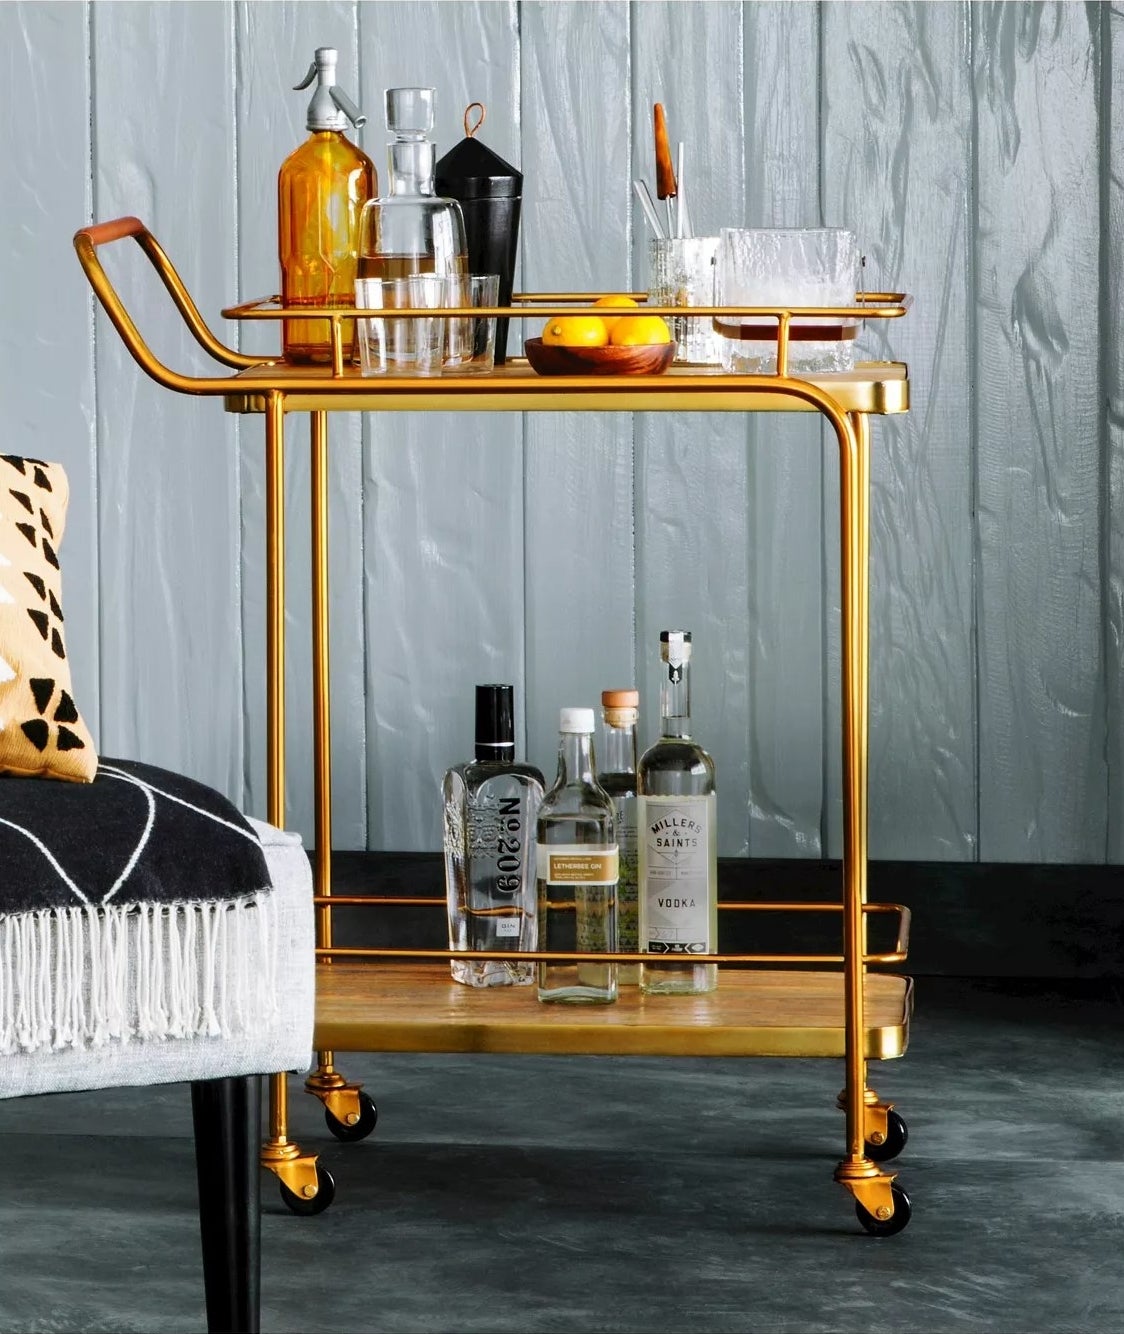 The gold bar cart with two open shelves on wheels